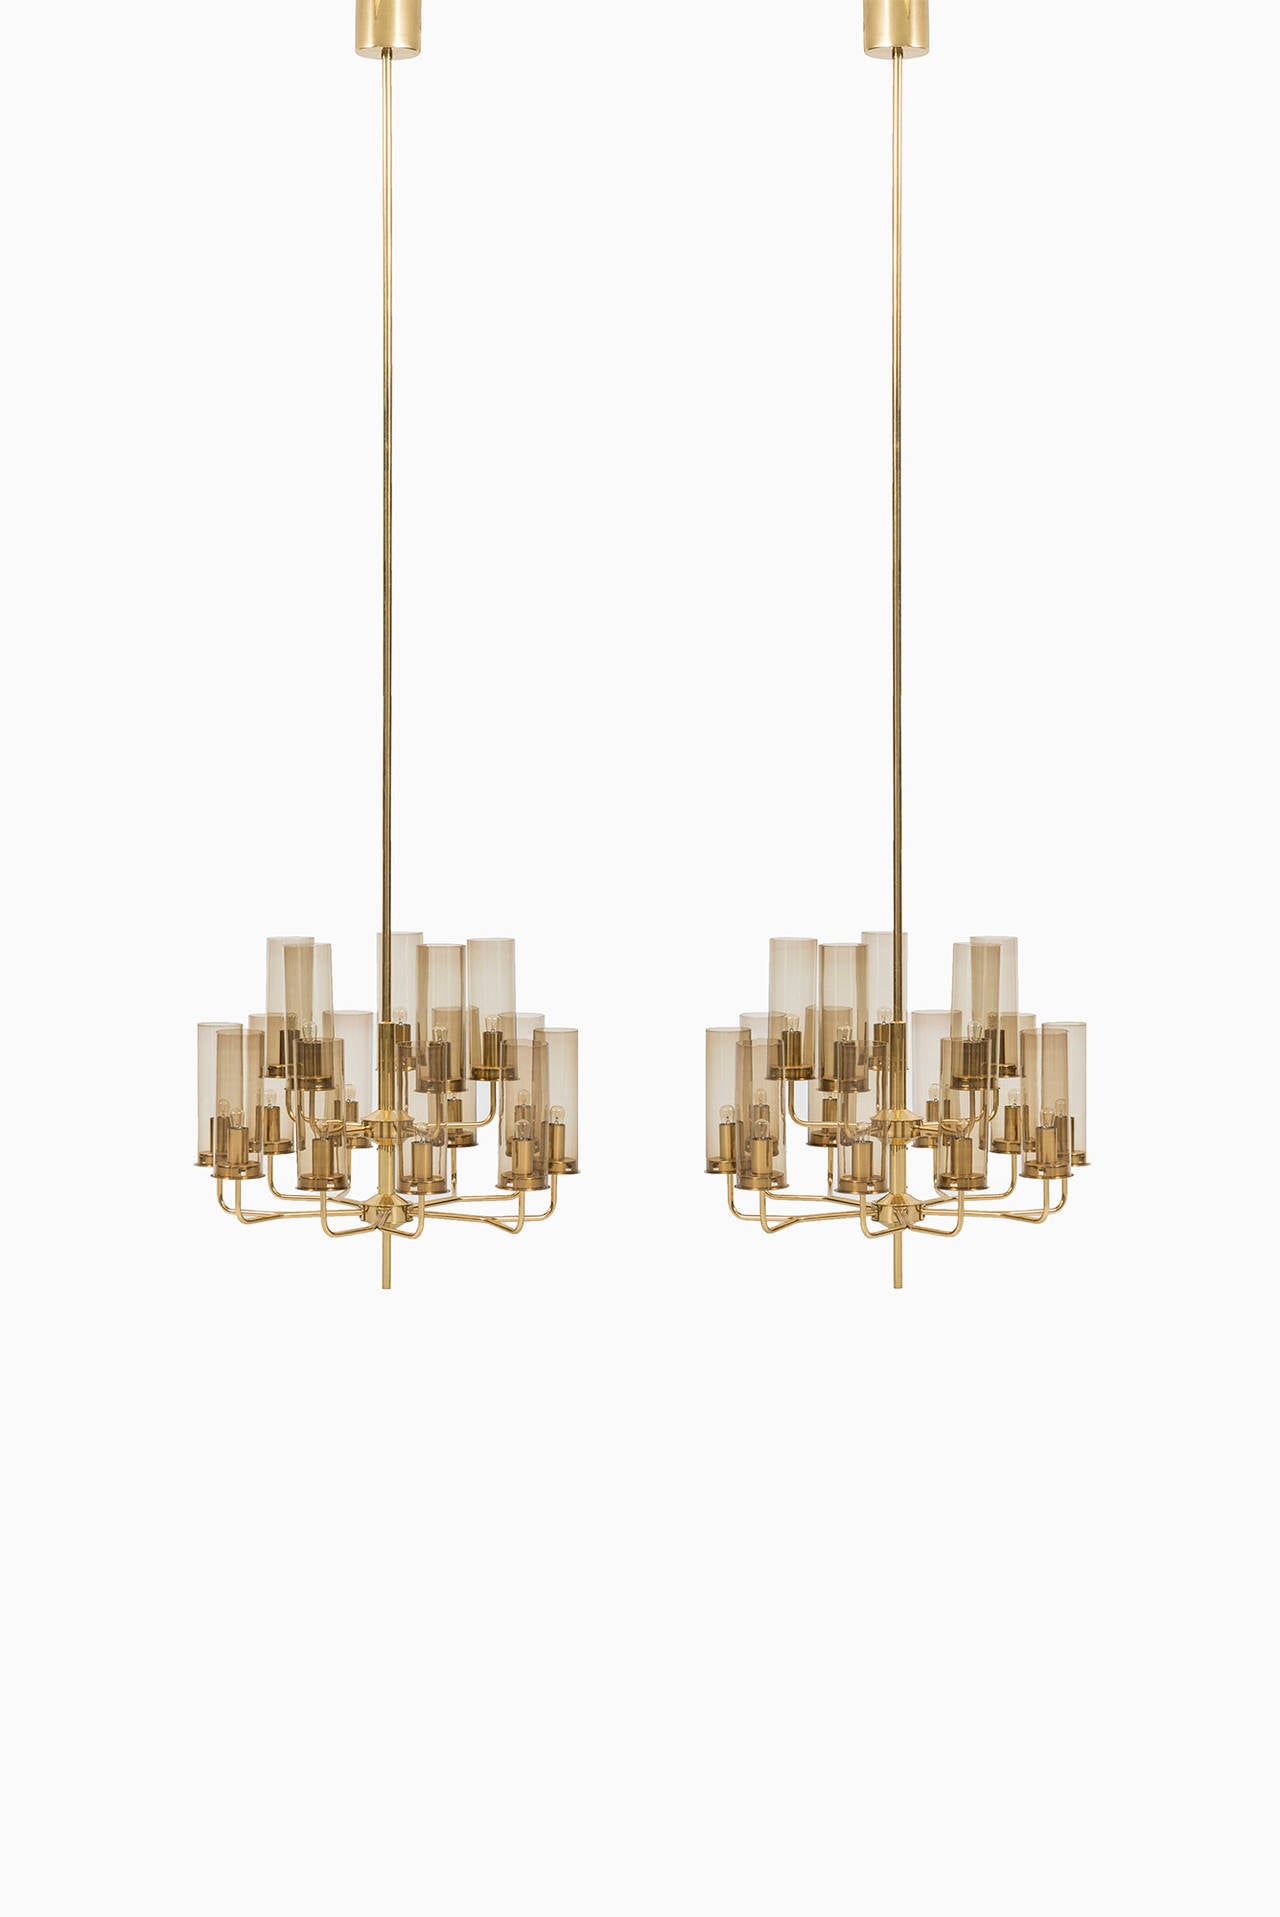 Big pair of Hans-Agne Jakobsson ceiling lamps model Sonata. Produced by Hans-Agne Jakobsson in Markaryd, Sweden. Suitable for public buildings, like hotel, banks or where there's a lot of ceiling height.